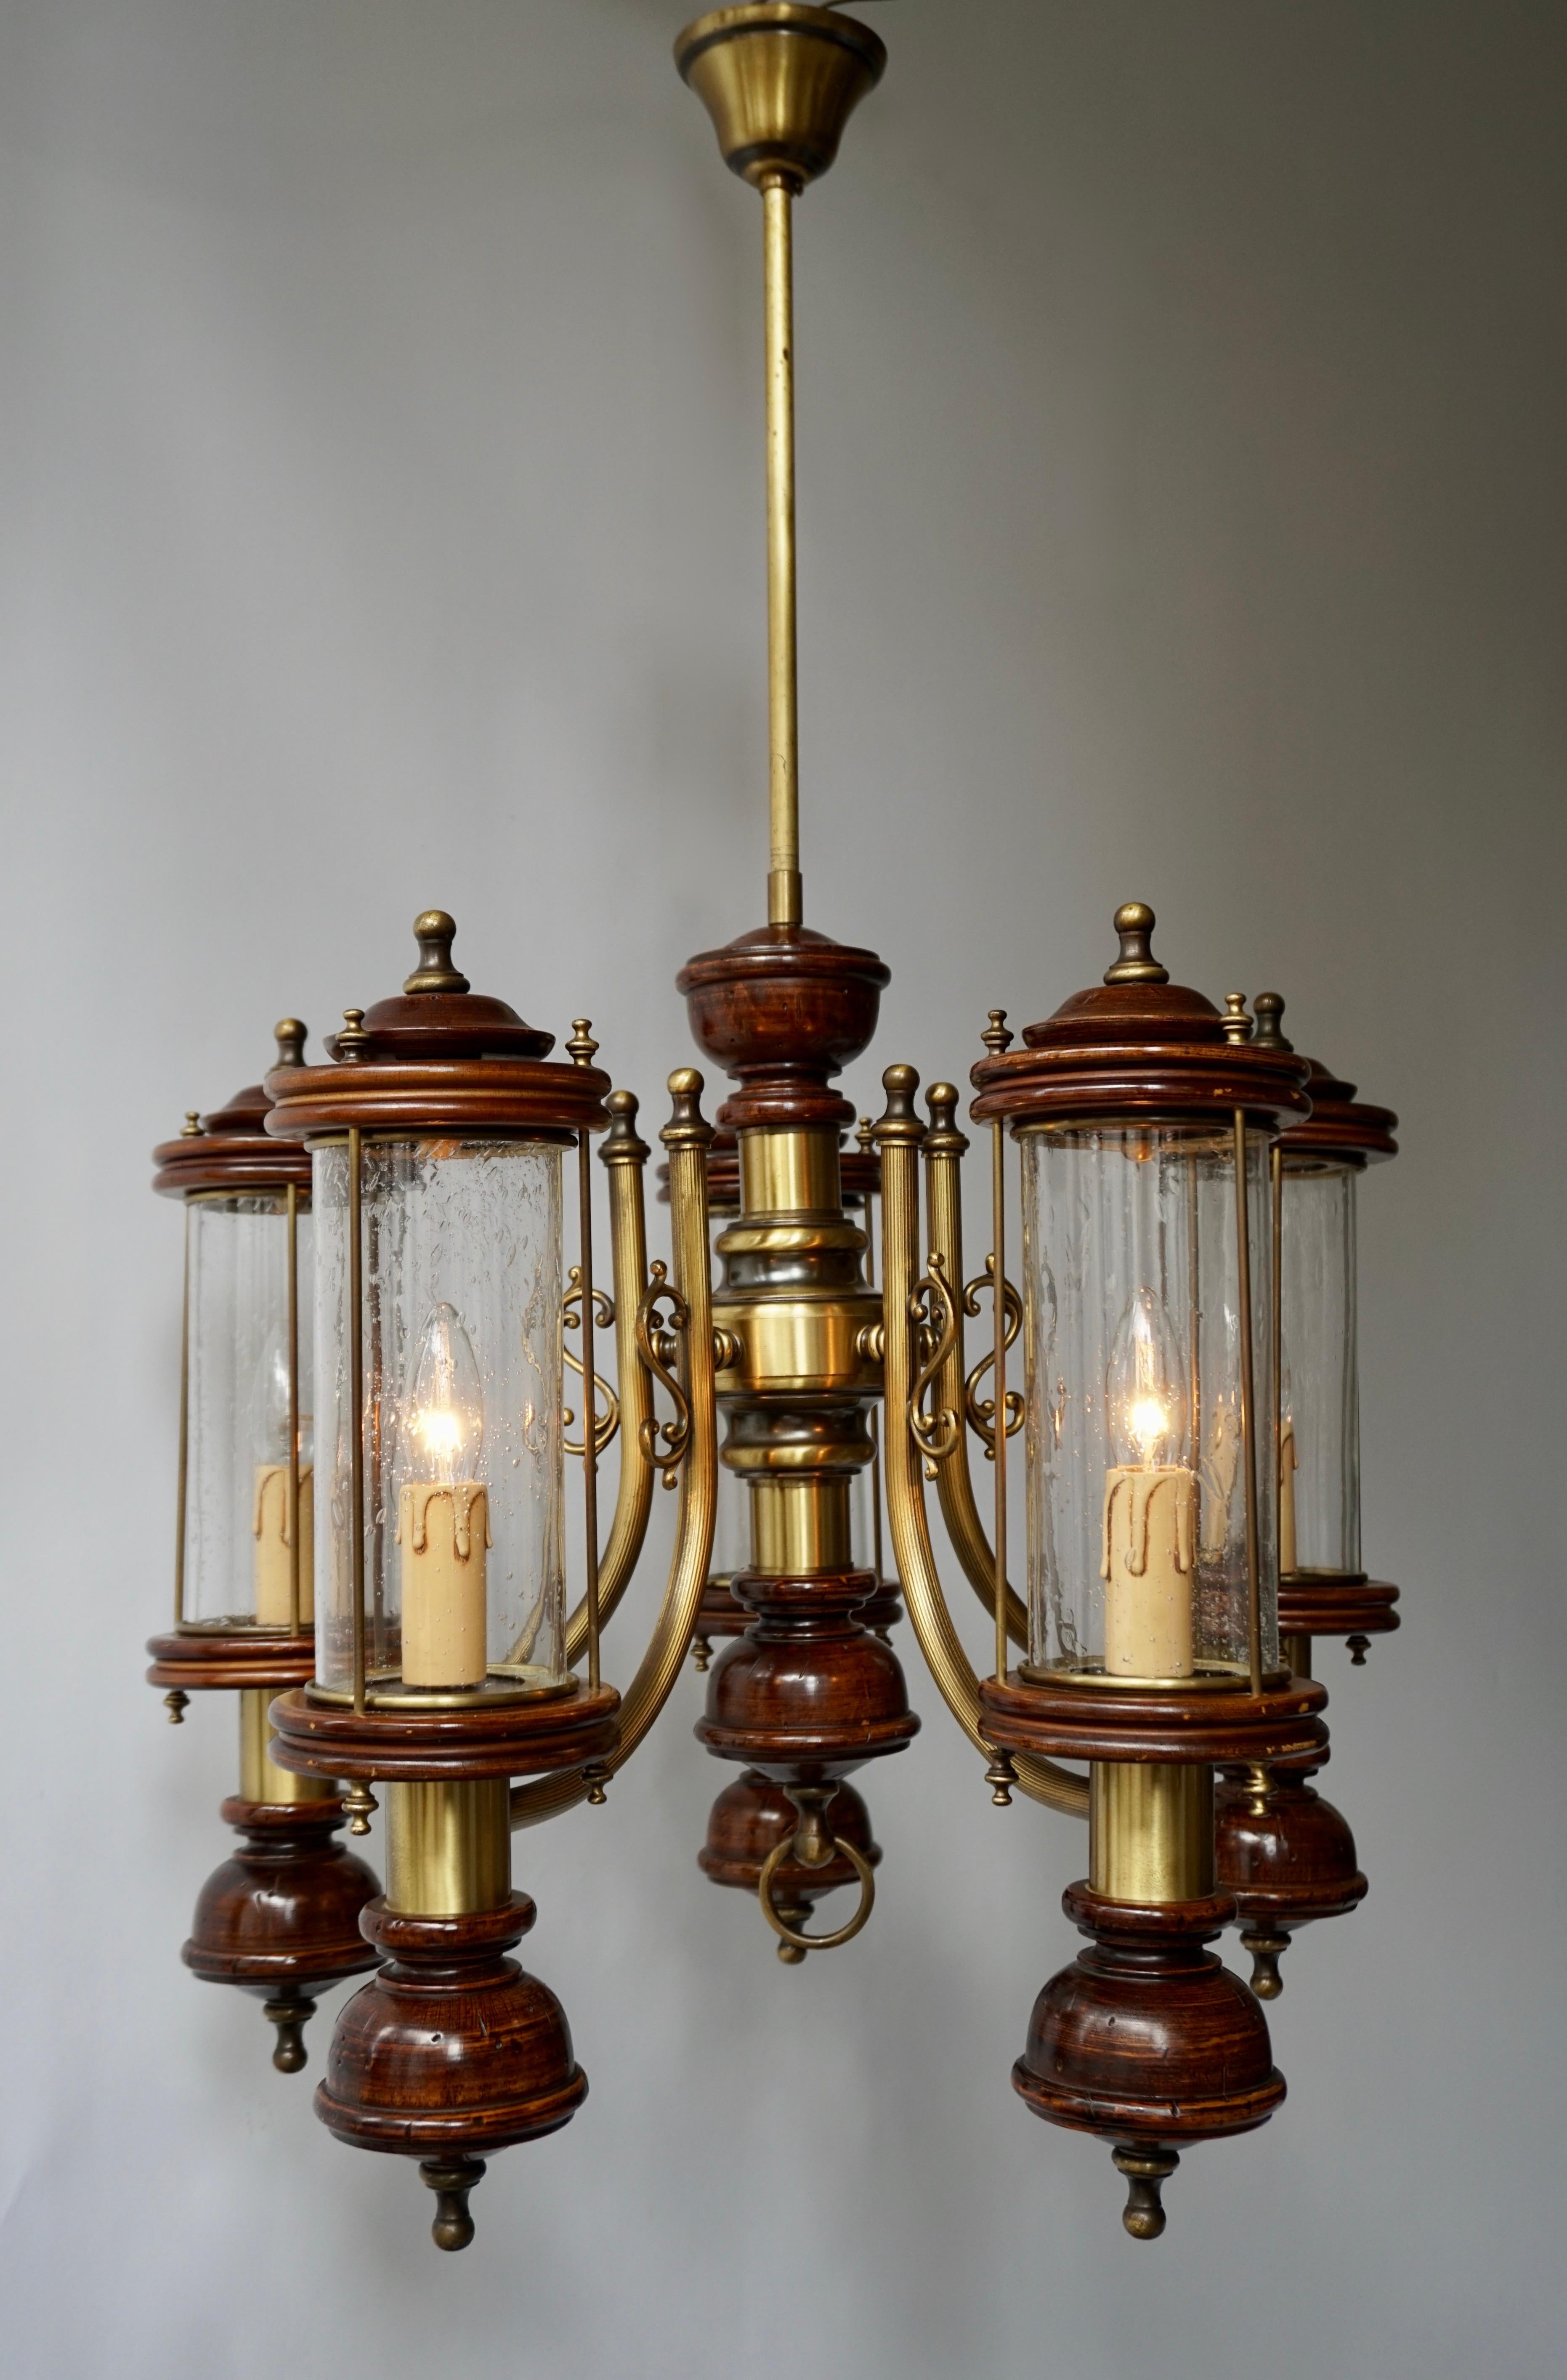 Beautiful five-light chandelier in glass brass and wood.
Measures: Diameter 60 cm.
Height fixture 50 cm.
Total height 95 cm.
Weight 10 kg.
Five E14 bulbs.